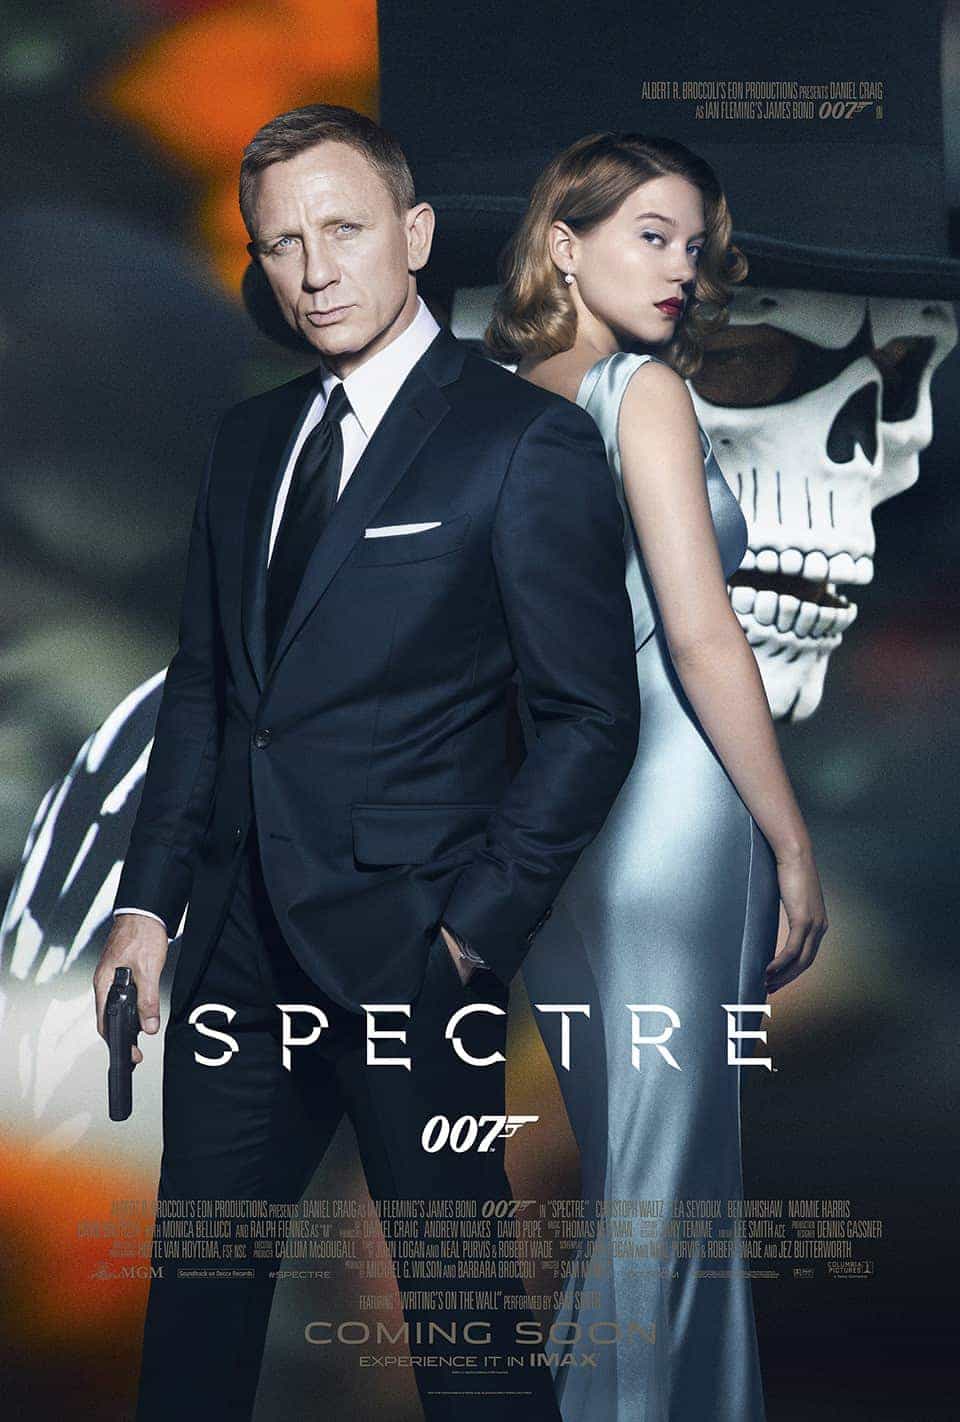 Spectre was the top film in the UK for 2015